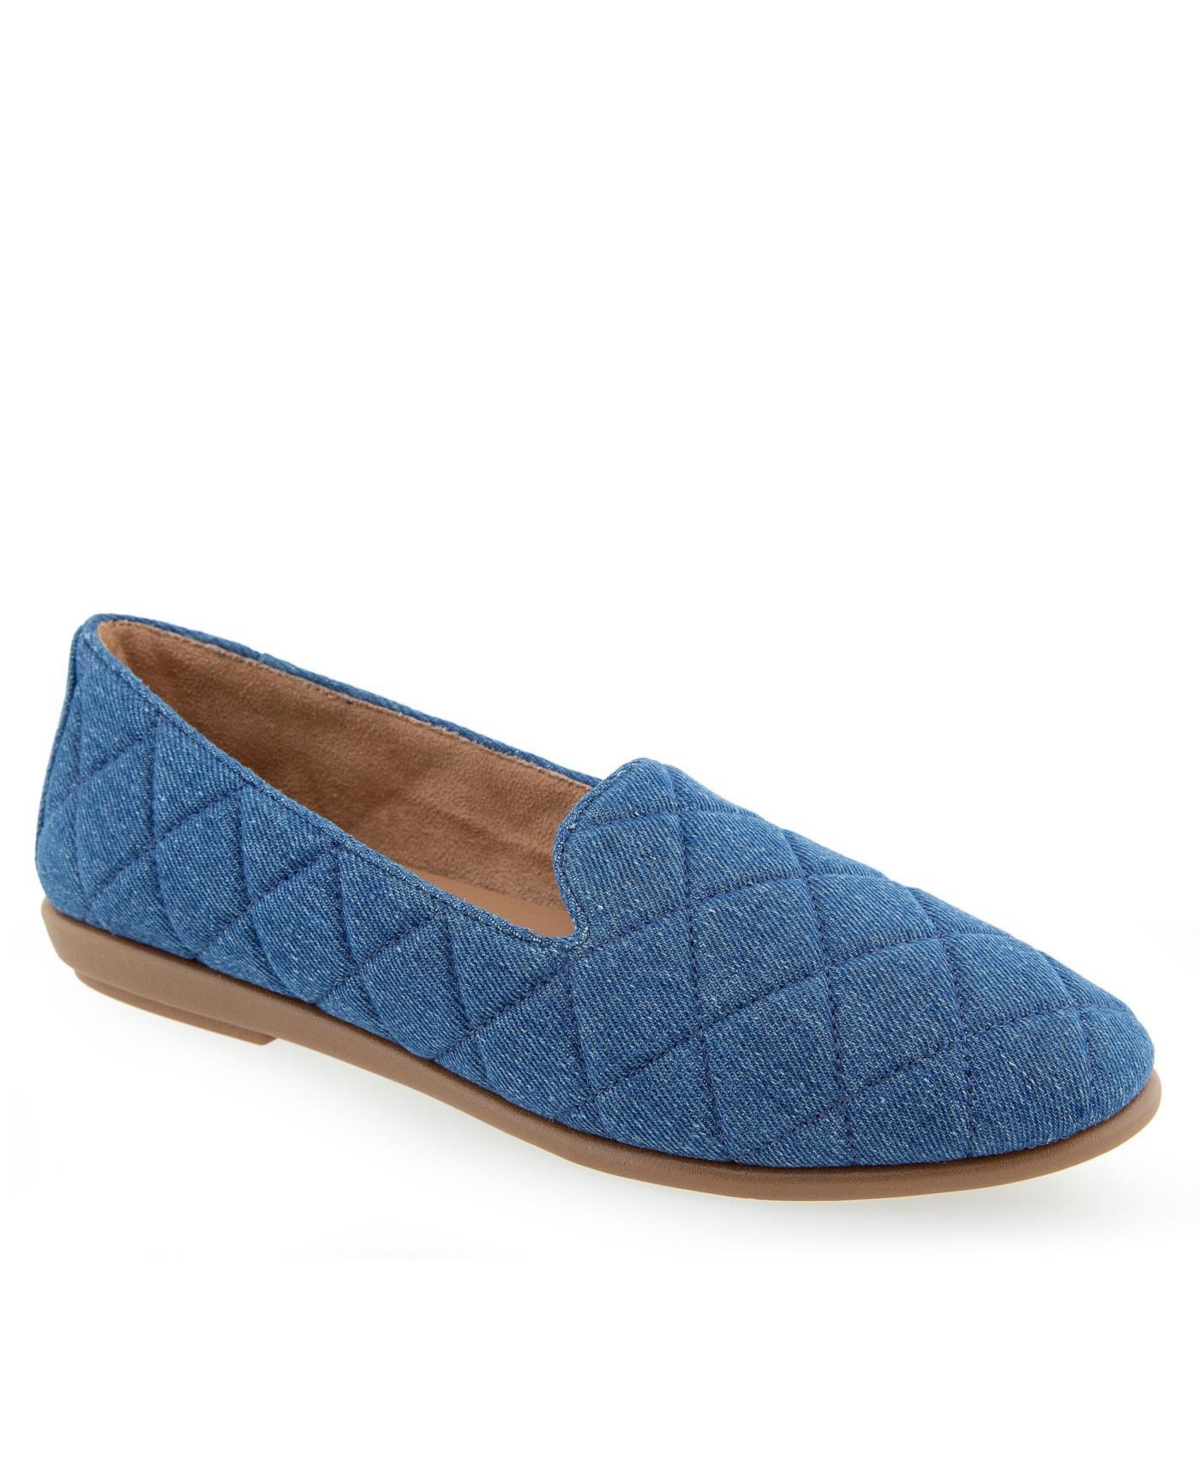 Aerosoles Women's Betunia Casual Flat Loafers In Med Blue Quilted Denim